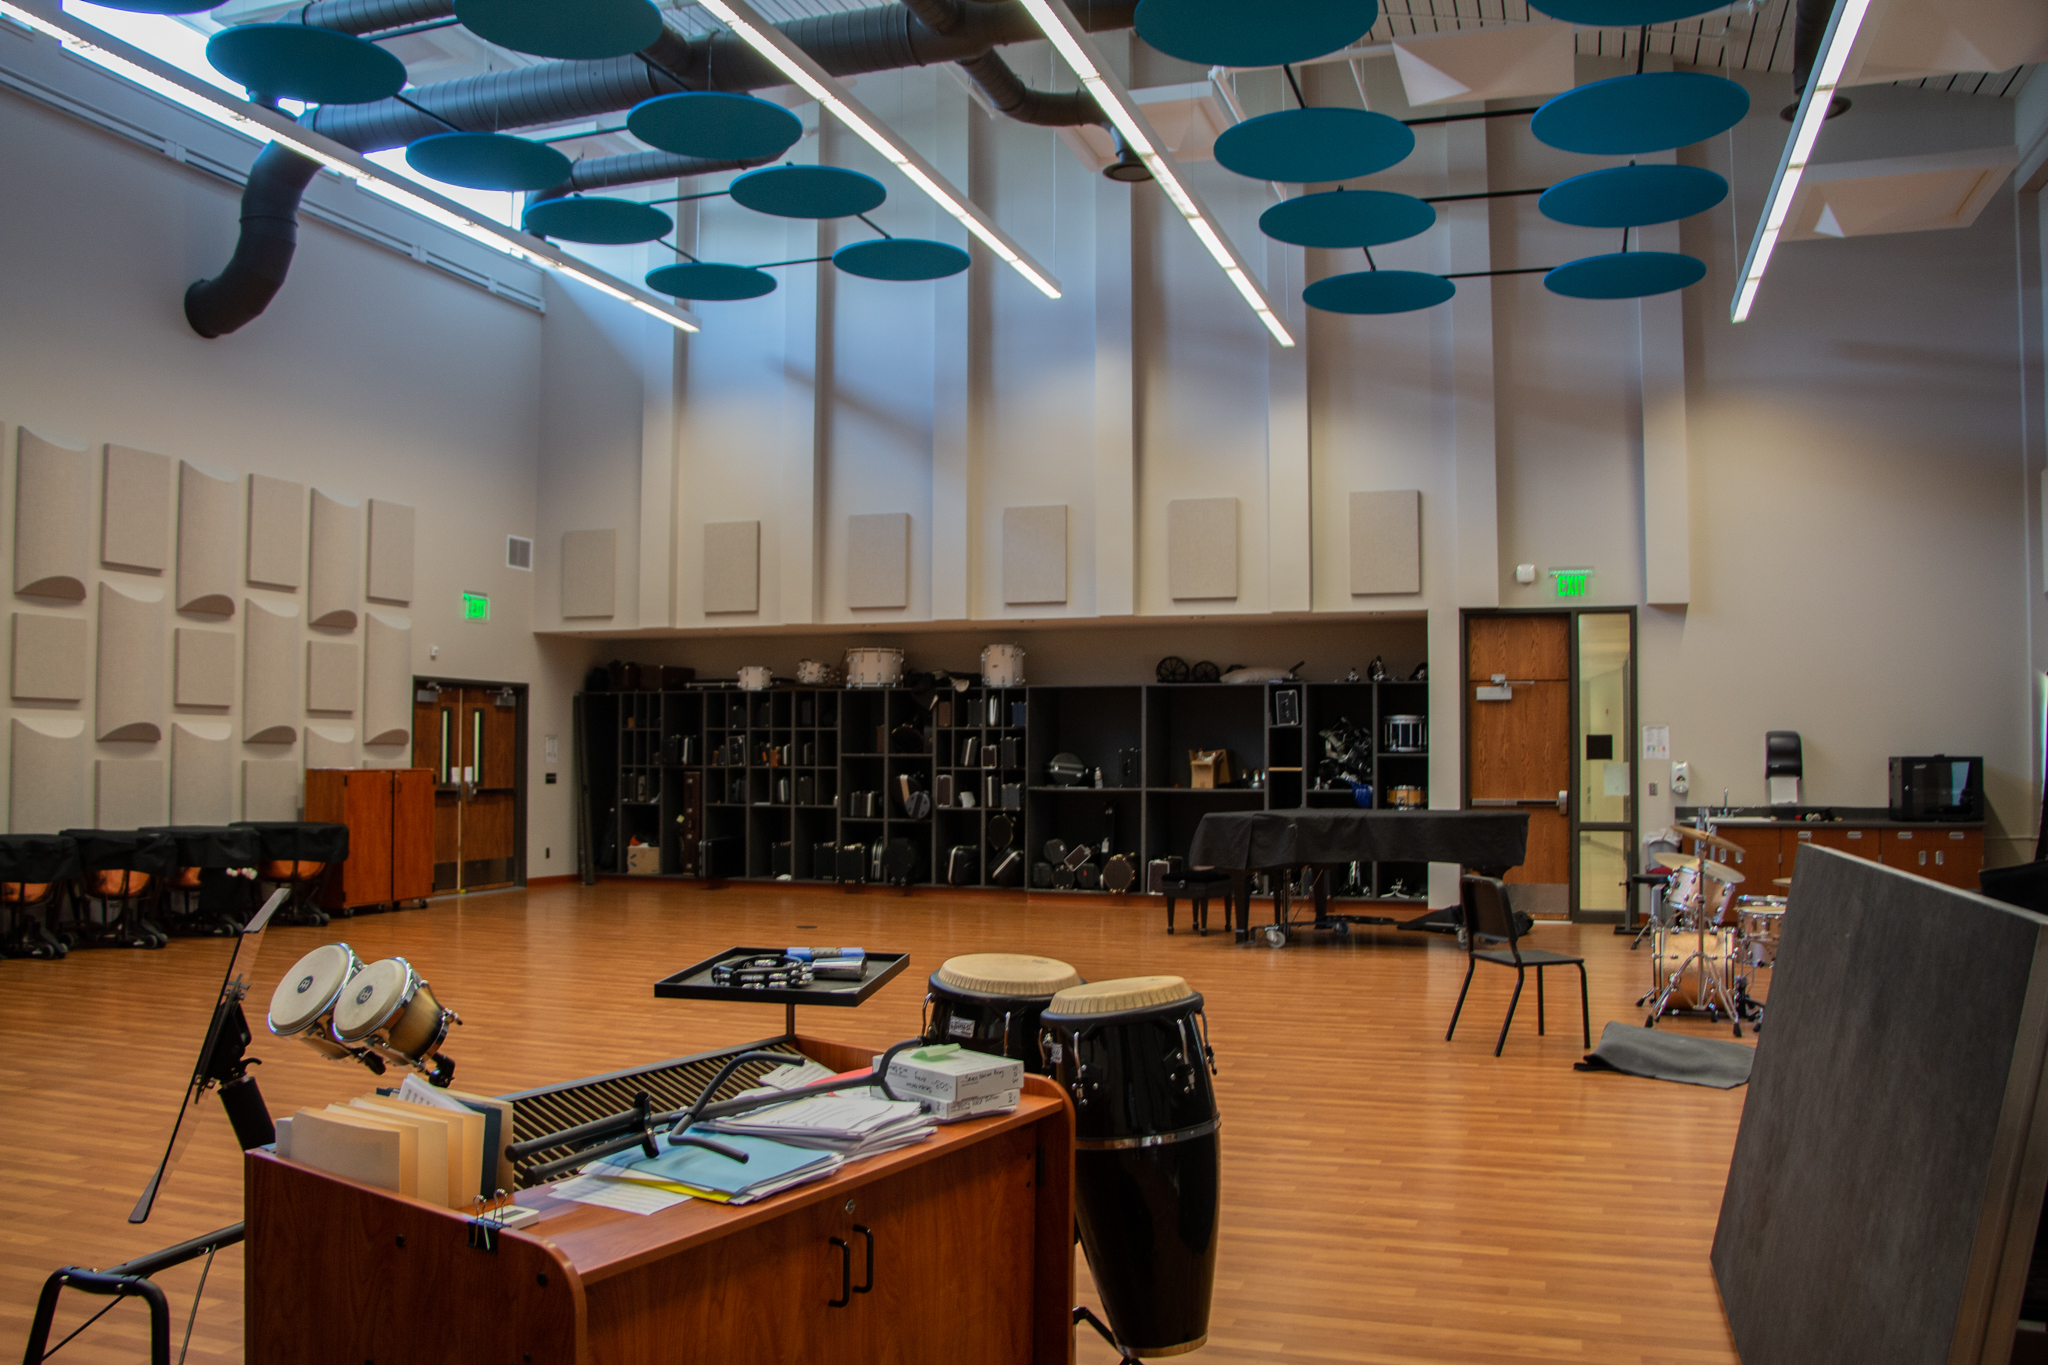 Jindra Band Room with acoustic wall and ceiling tiles, baby grand piano, sink, chairs and music stands.